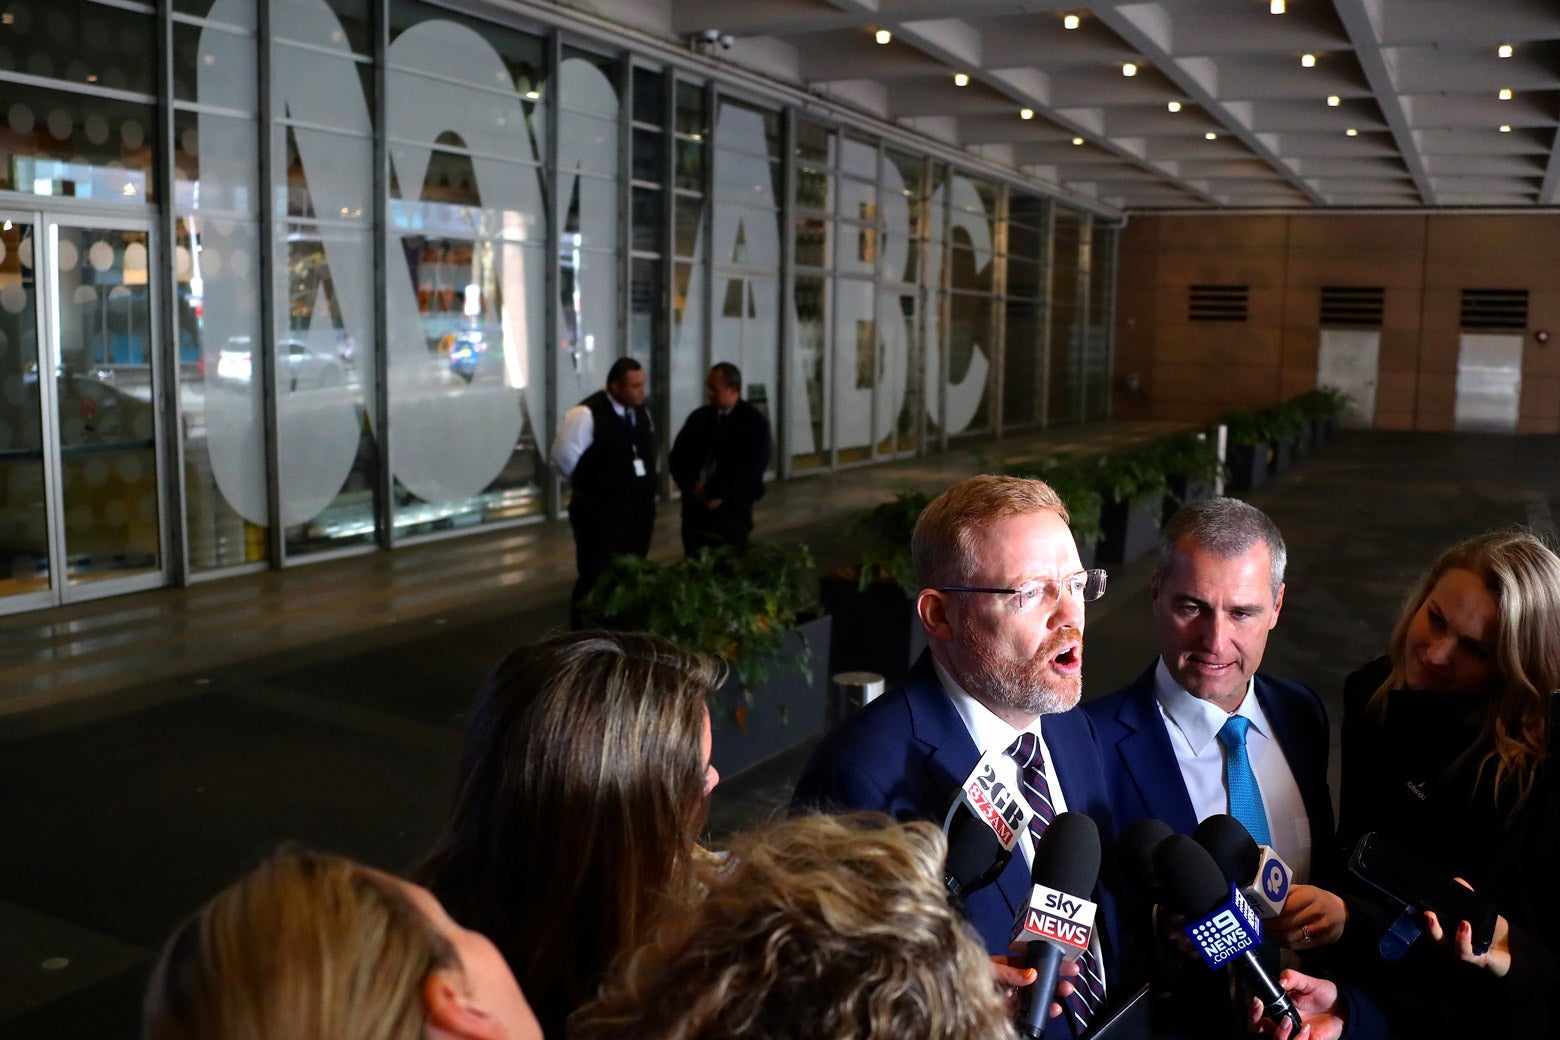 Craig McMurtrie, editorial director of the Australian Broadcasting Corporation, speaks to members of the media outside the ABC building.